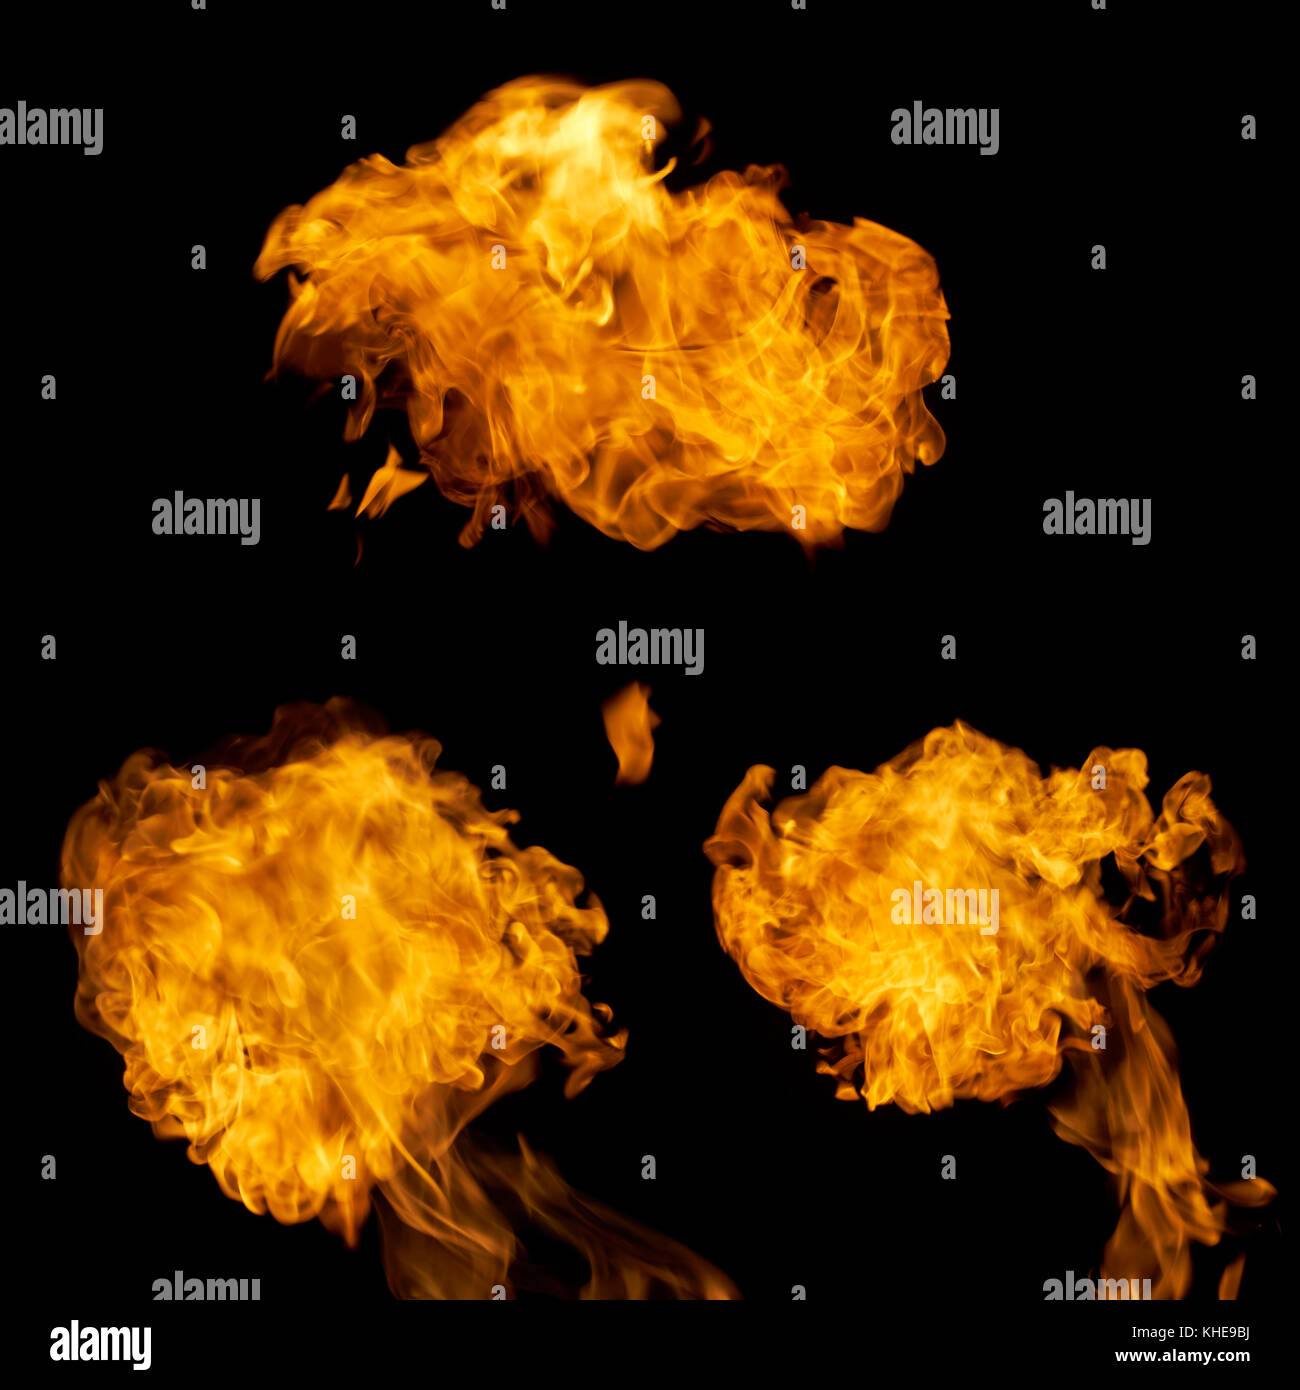 Fire flames collection isolated on black background Stock Photo